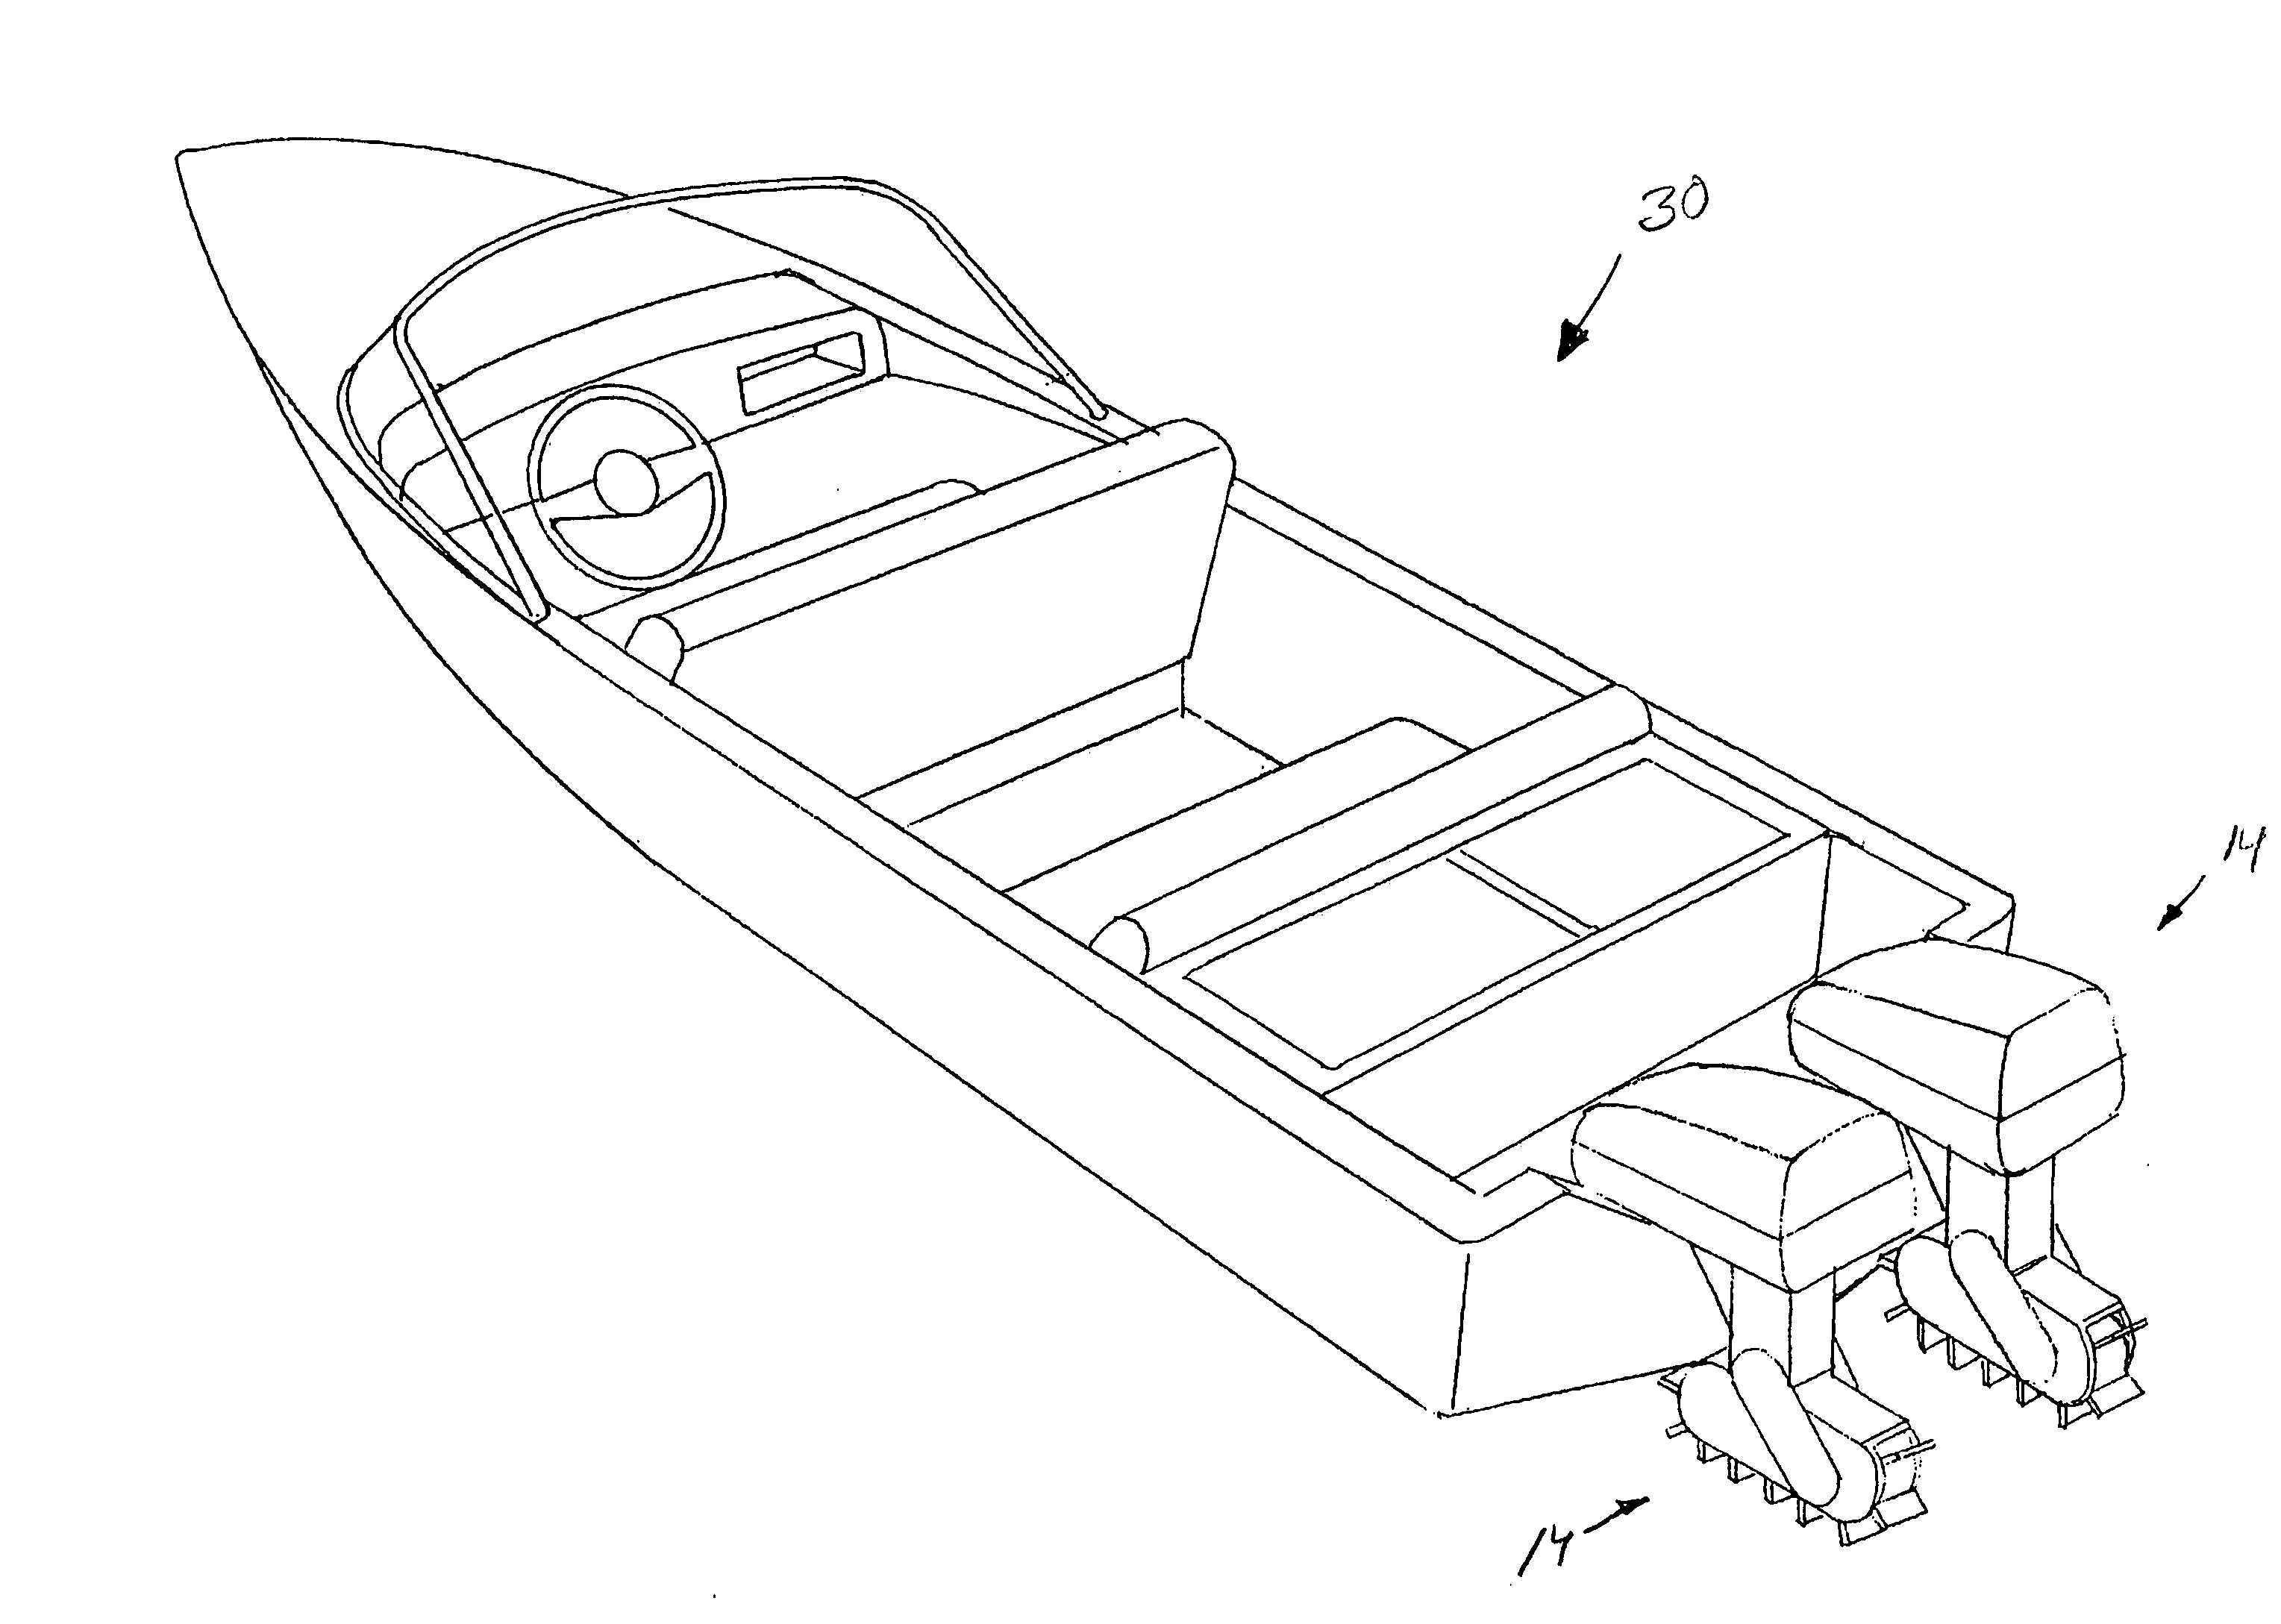 Propulsion system for a watercraft